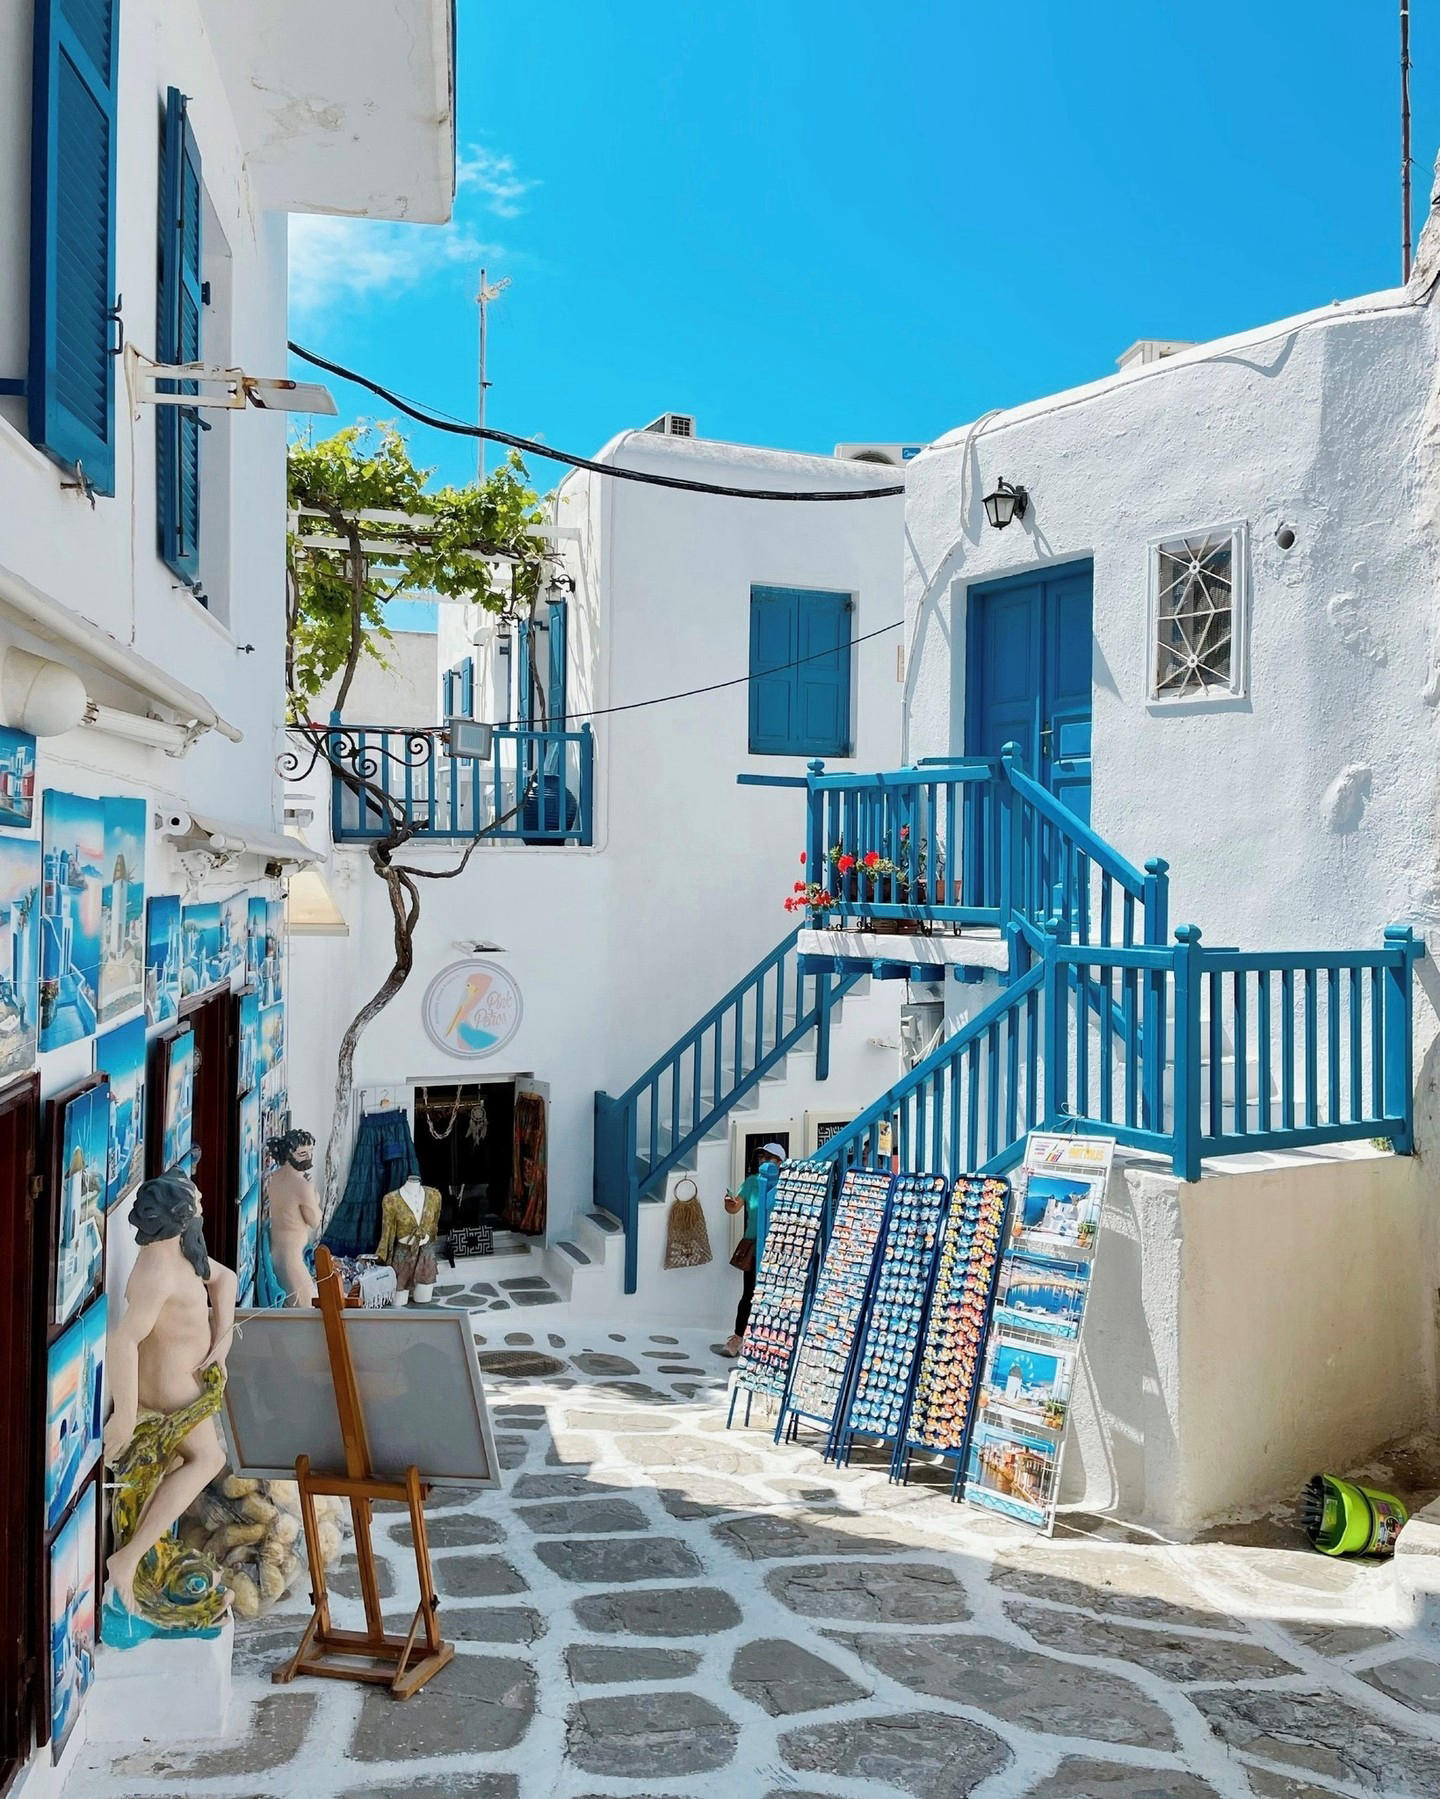 Make Mykonos this year’s holiday destination of choice and give yourself something blue-tiful to loo